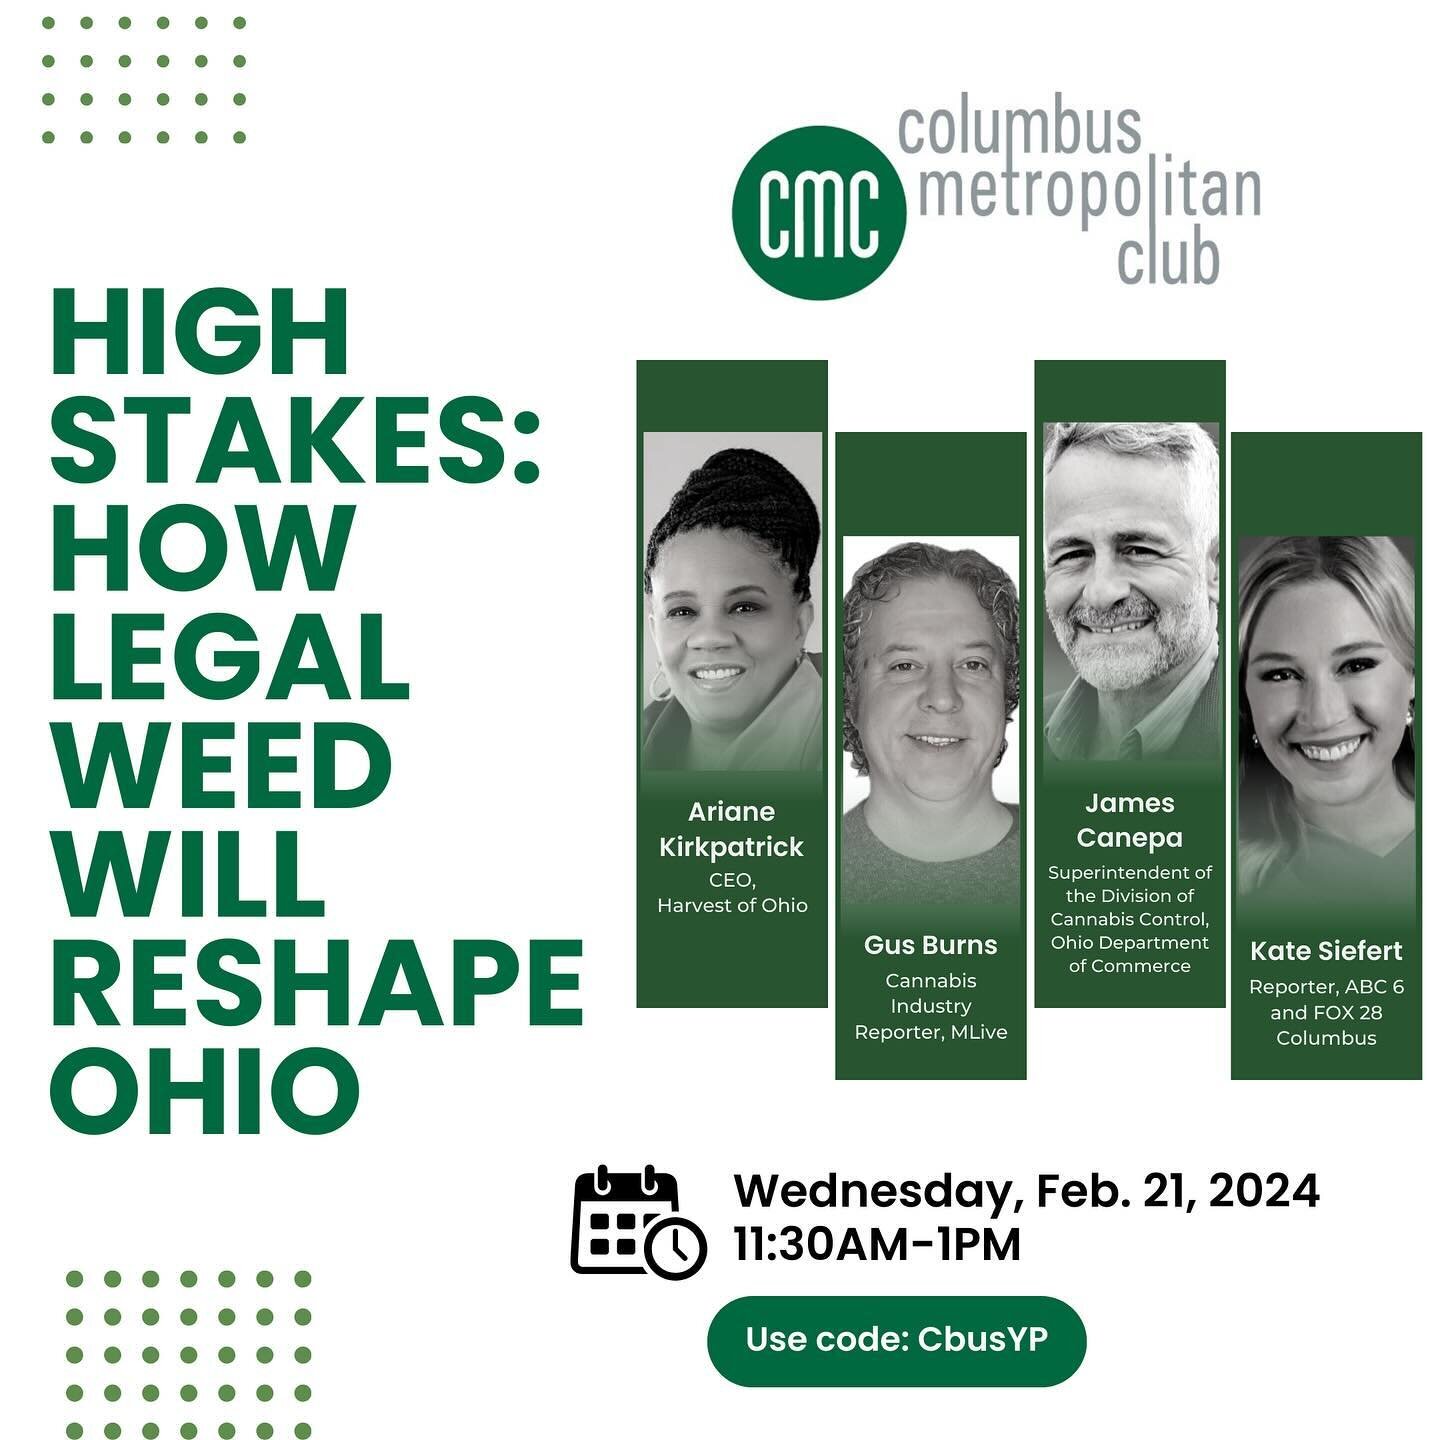 The CYP Club is excited to partner with the Columbus Metropolitan Club for an enlightening event on Wednesday, Feb. 21 at The Ellis in downtown Columbus. We&rsquo;re set to explore the vast implications of cannabis legalization in Ohio, delving into 